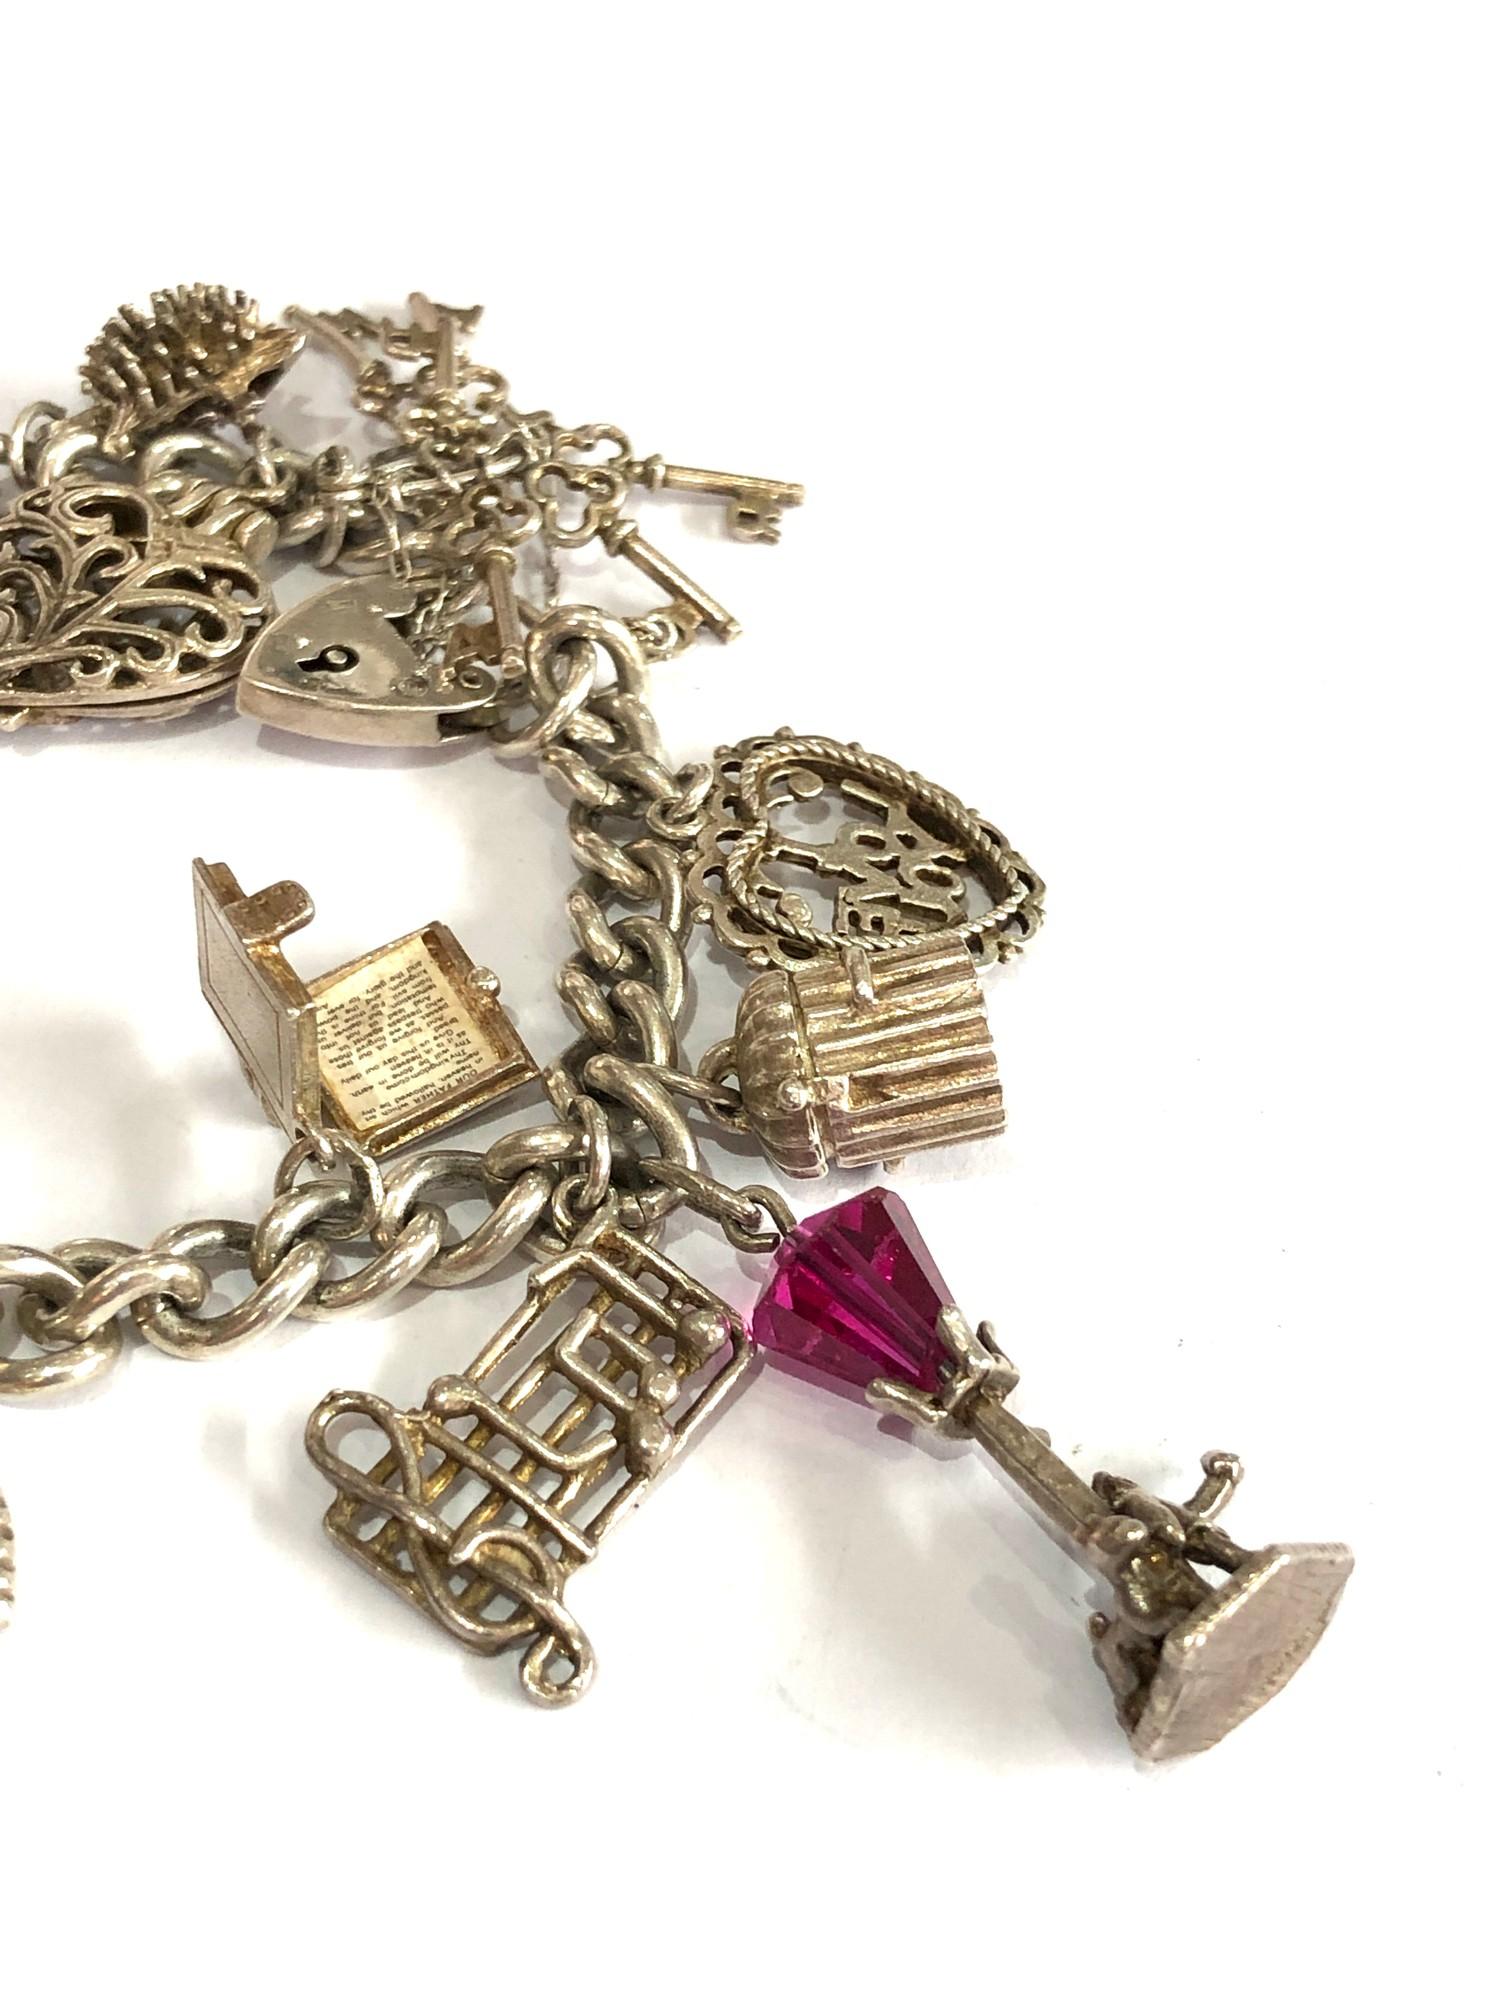 Silver charm bracelet weight 53g - Image 2 of 3